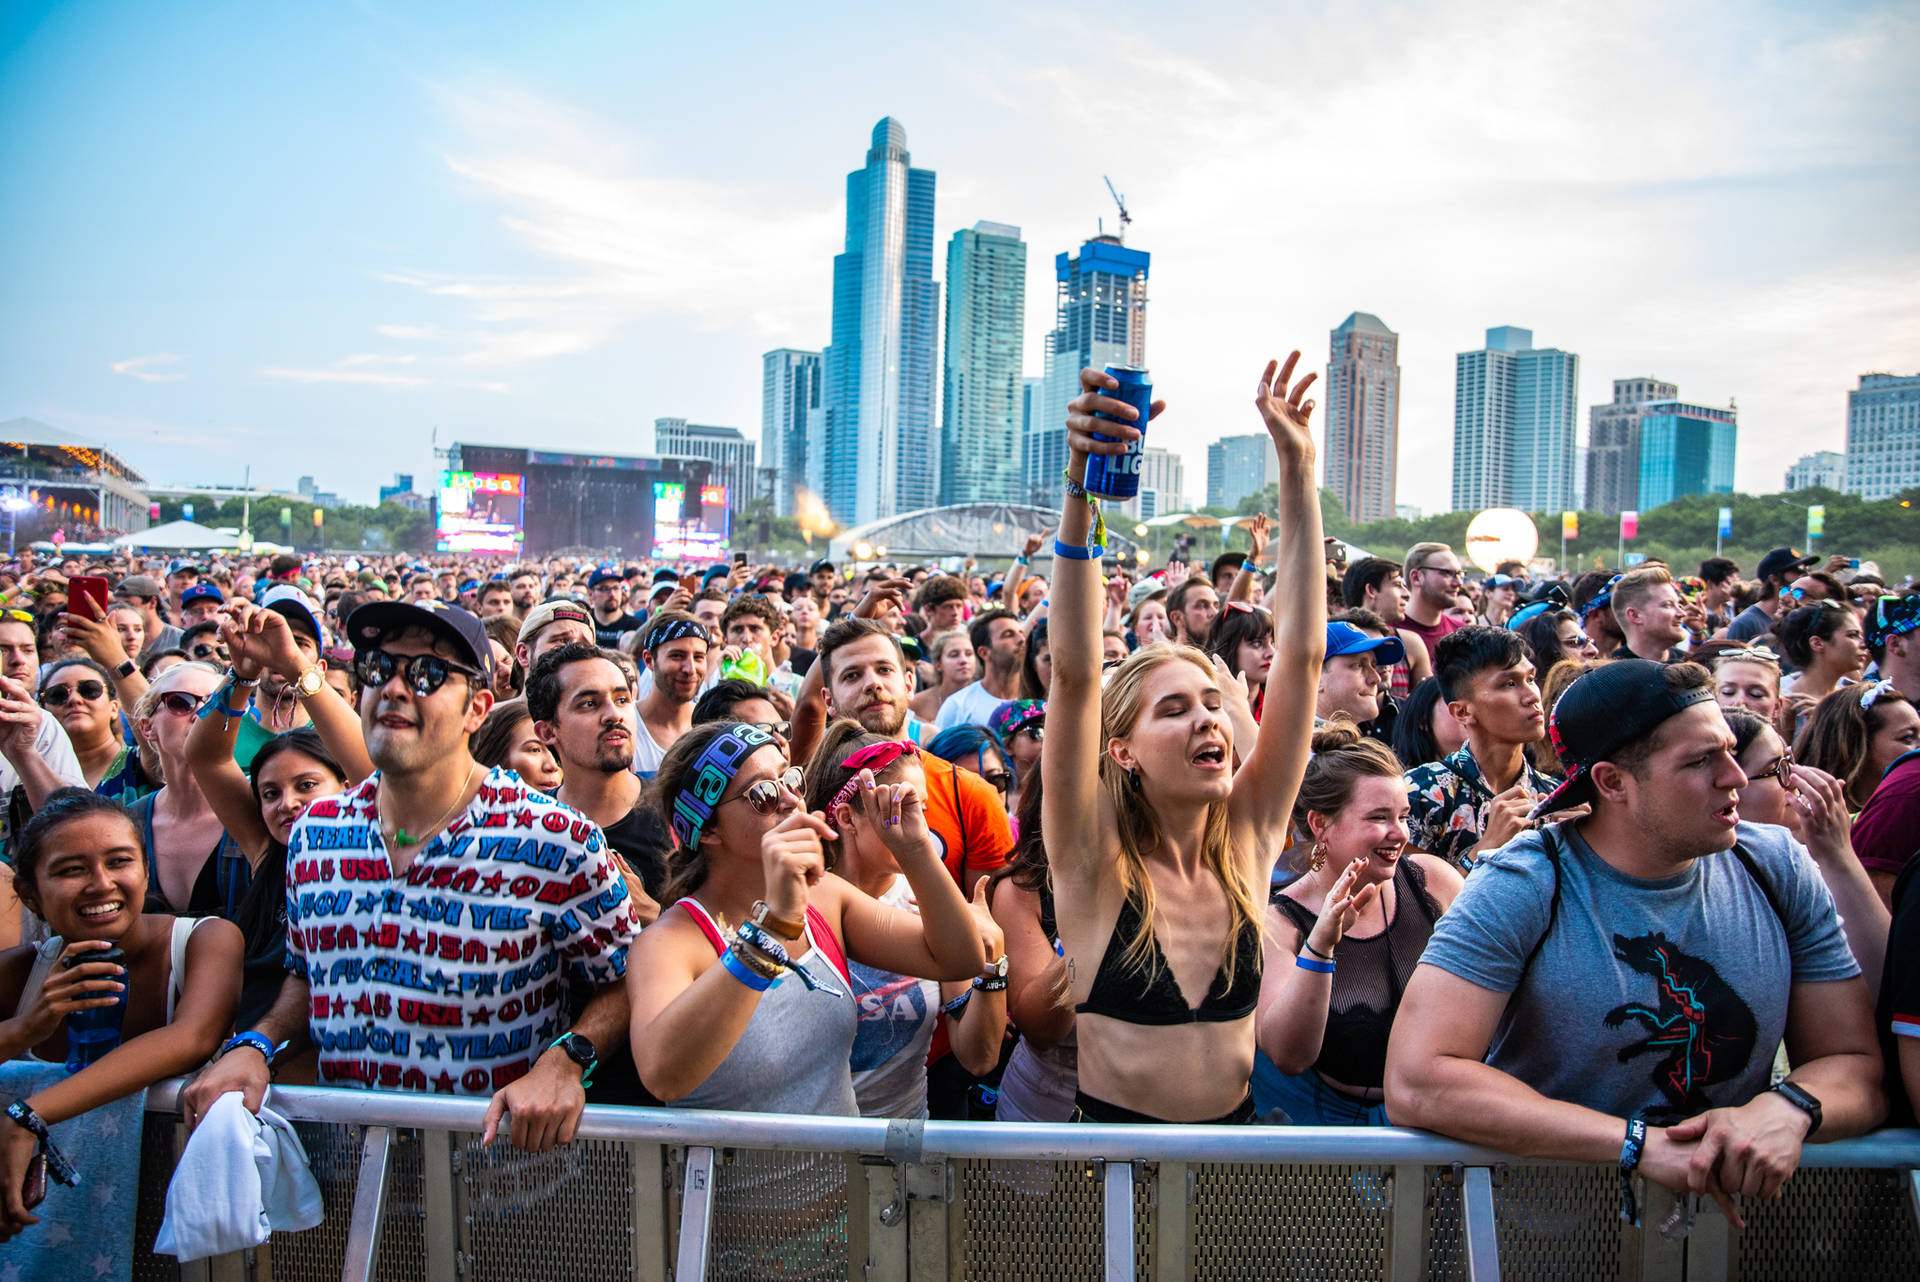 Thousands Of Fans Having A Great Time Enjoying The Music At Lollapalooza In Chicago Background